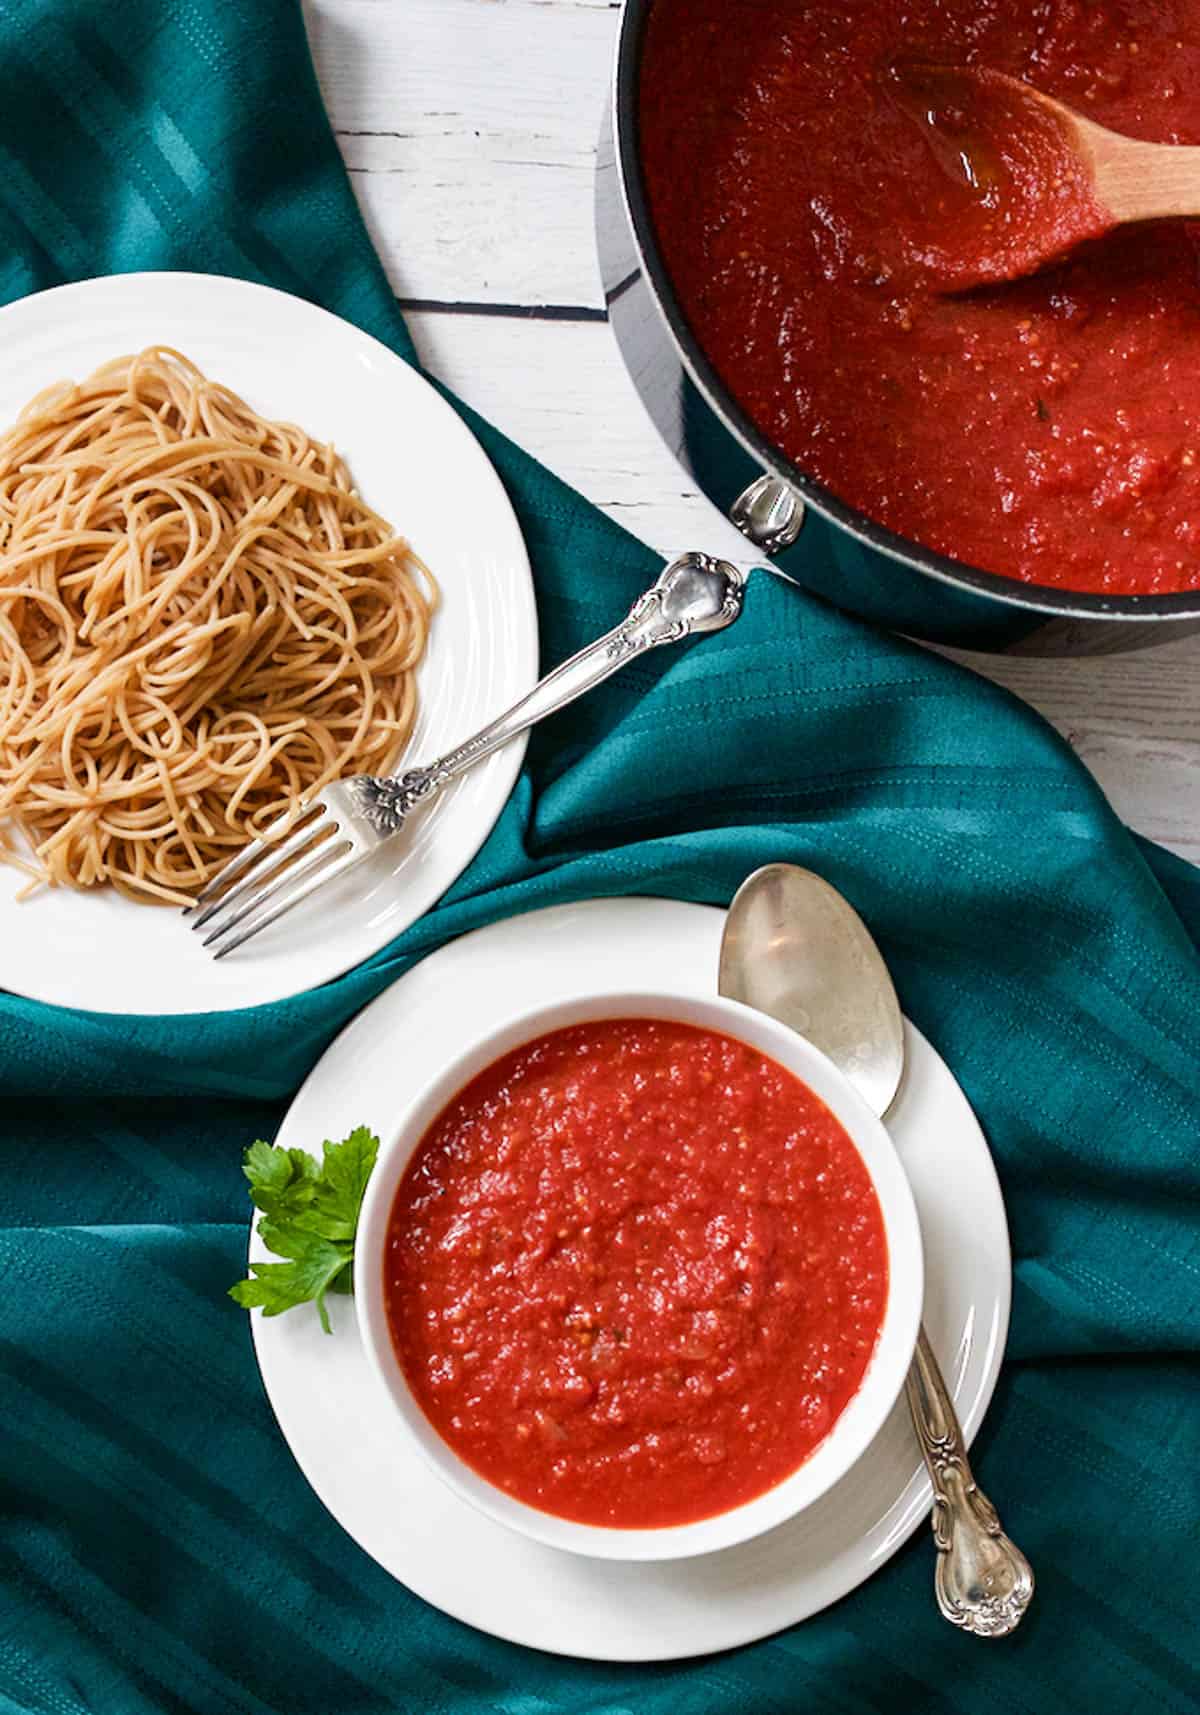 A bowl full of homemade spaghetti sauce with the pot in the background and a bowl of spaghetti noodles to the side.